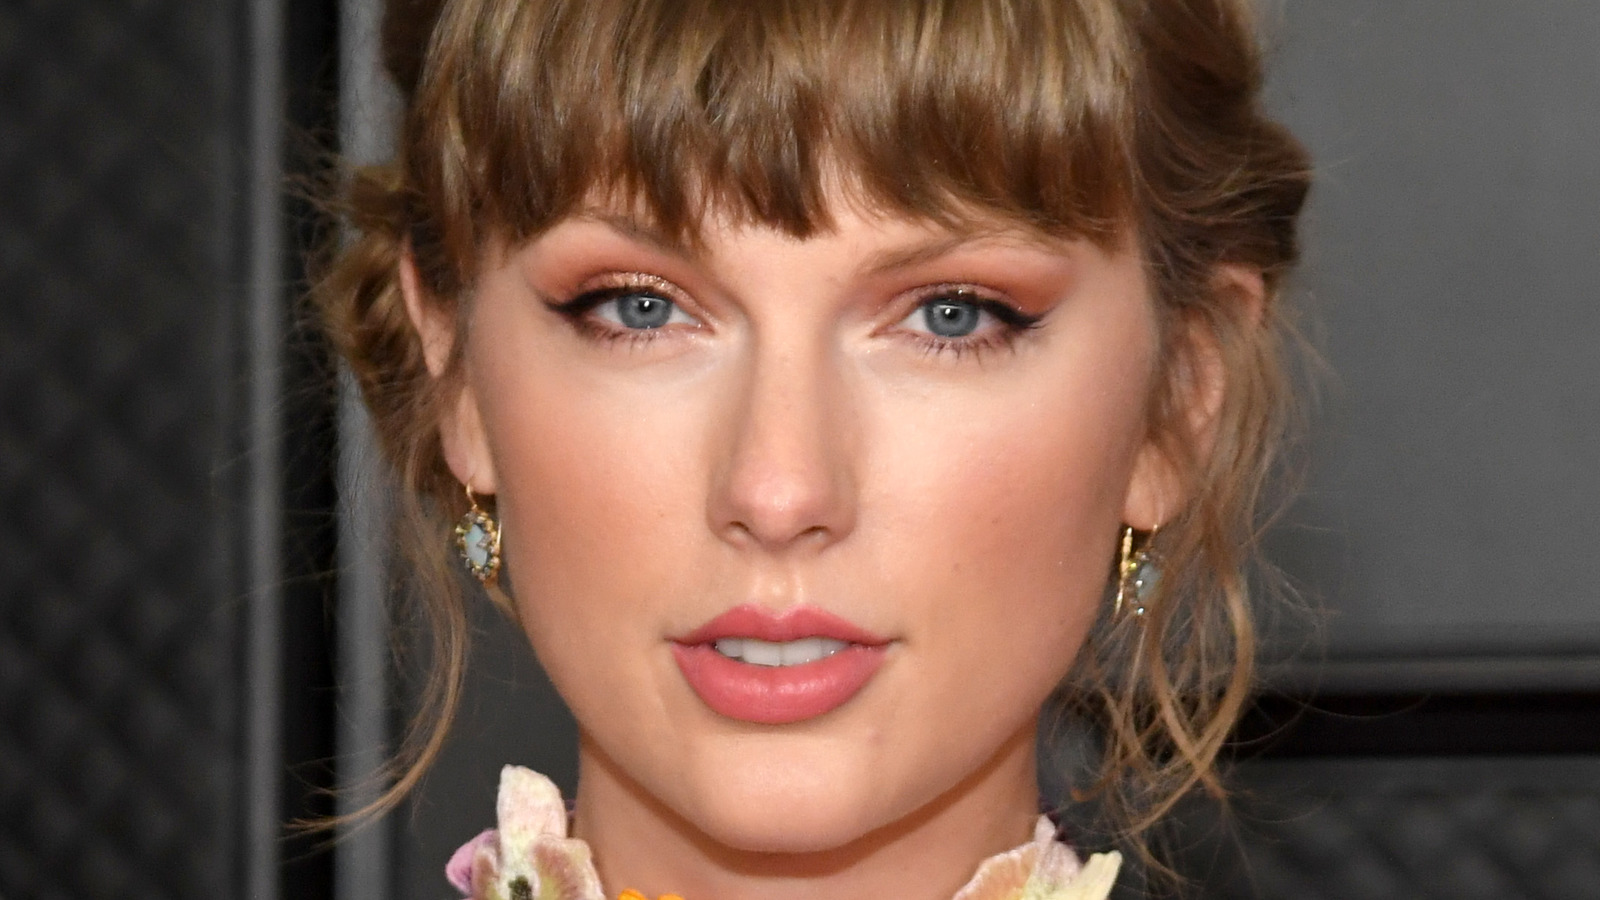 What You Don't Know About Taylor Swift's Past Relationships